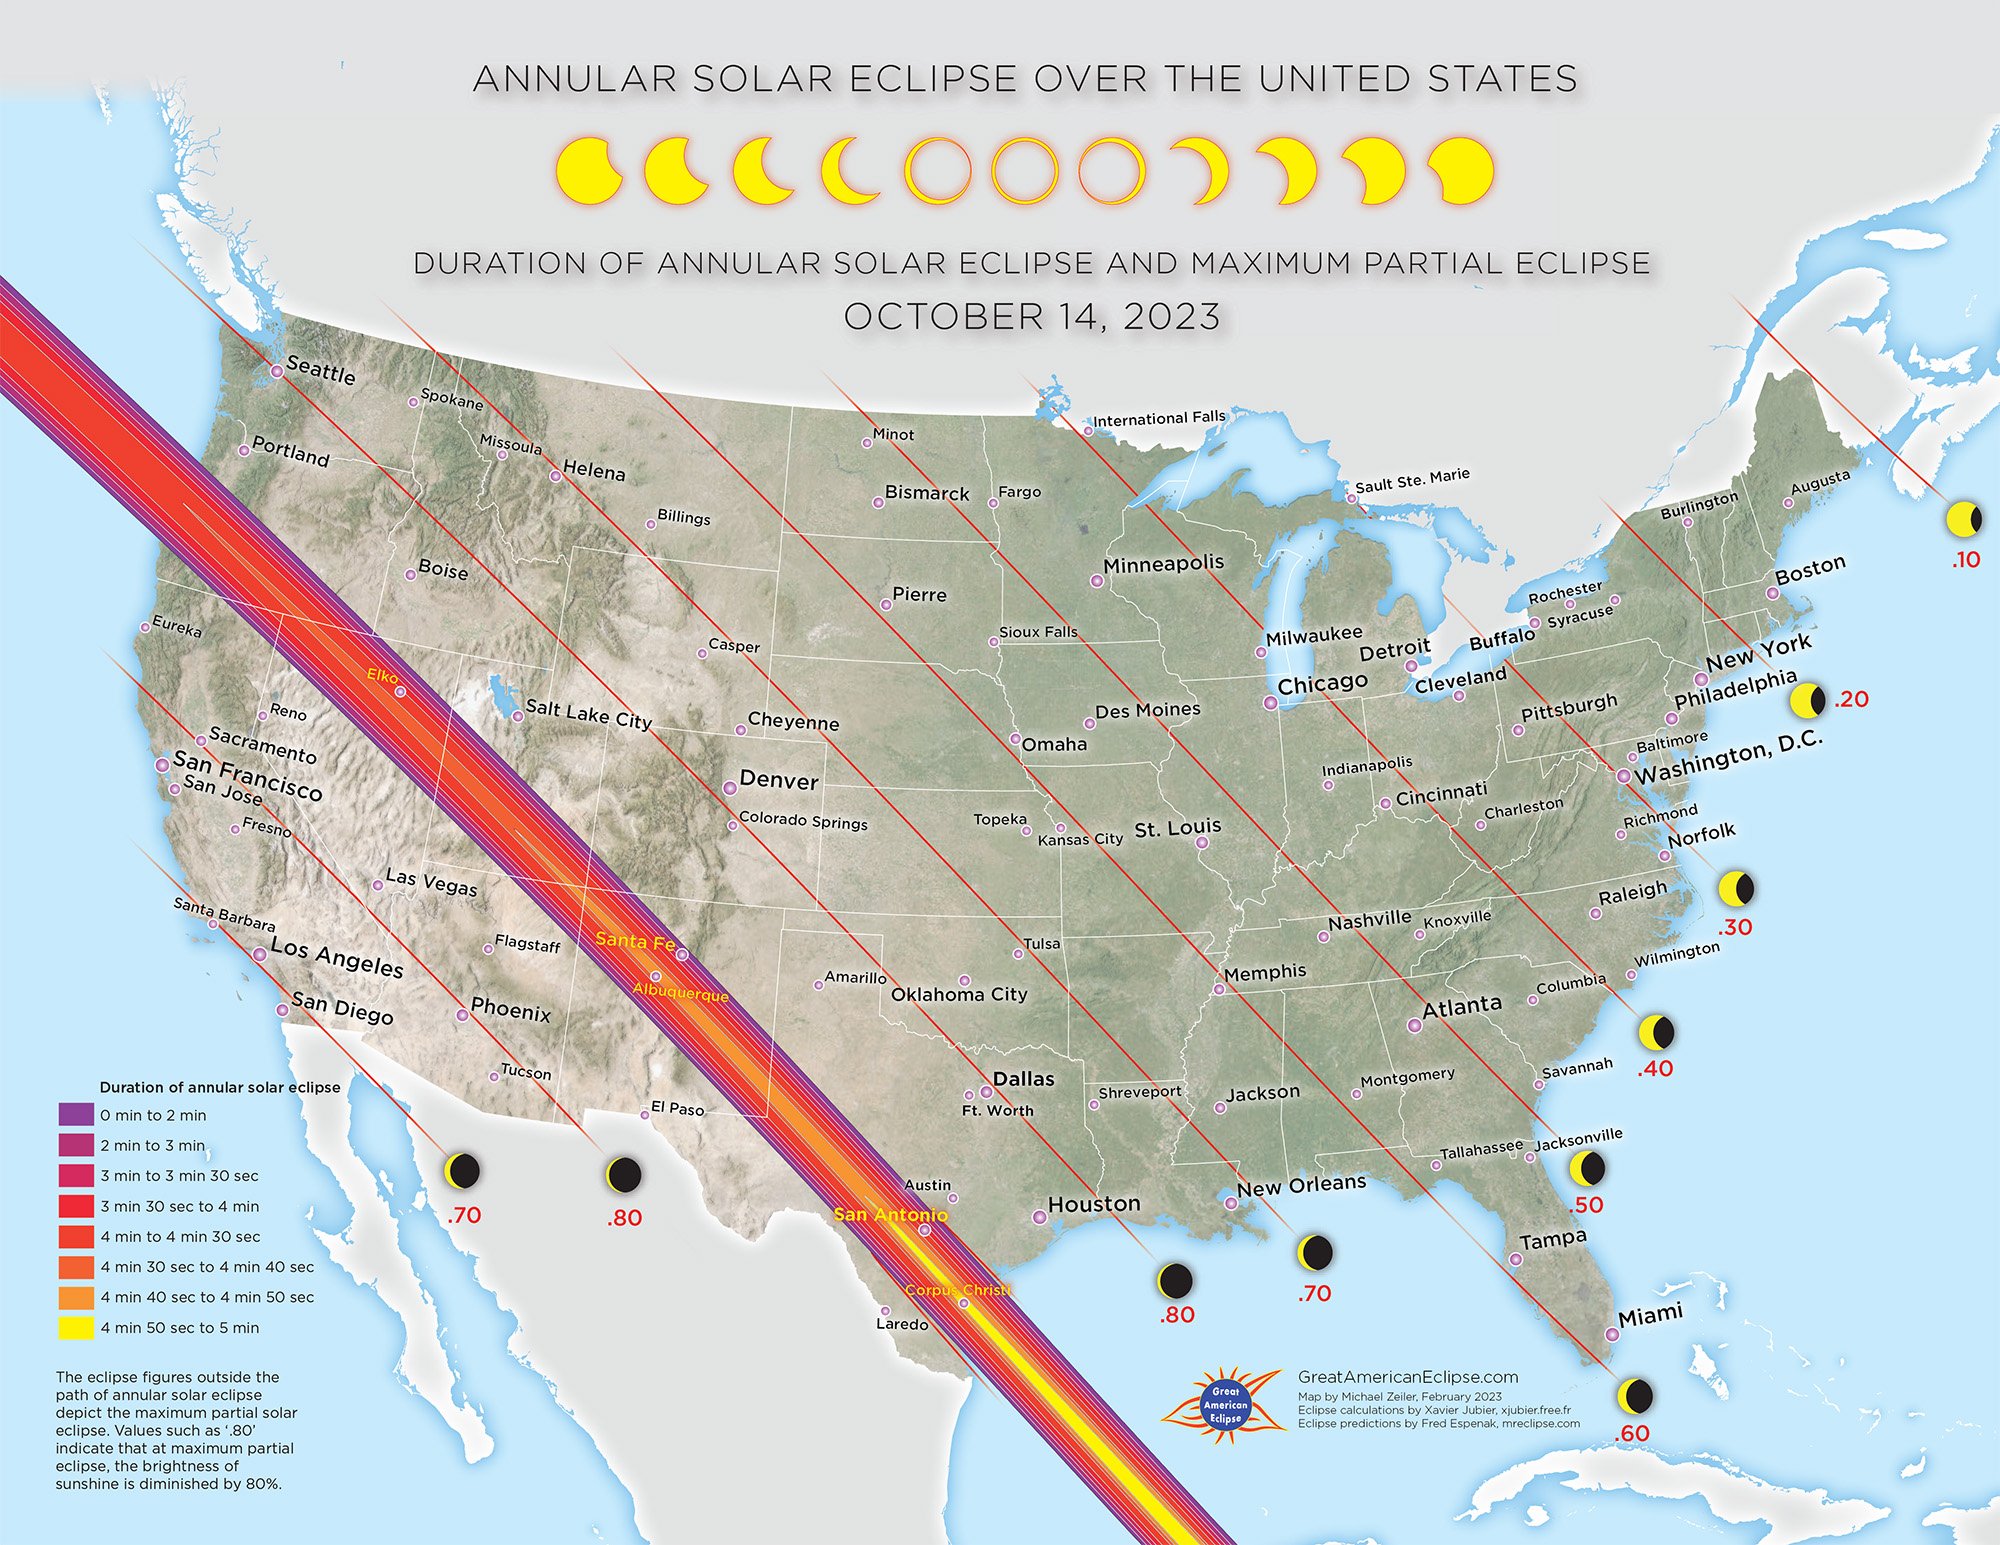 ASE2023_UnitedStates_Duration_and_Partial_Eclipse.jpg